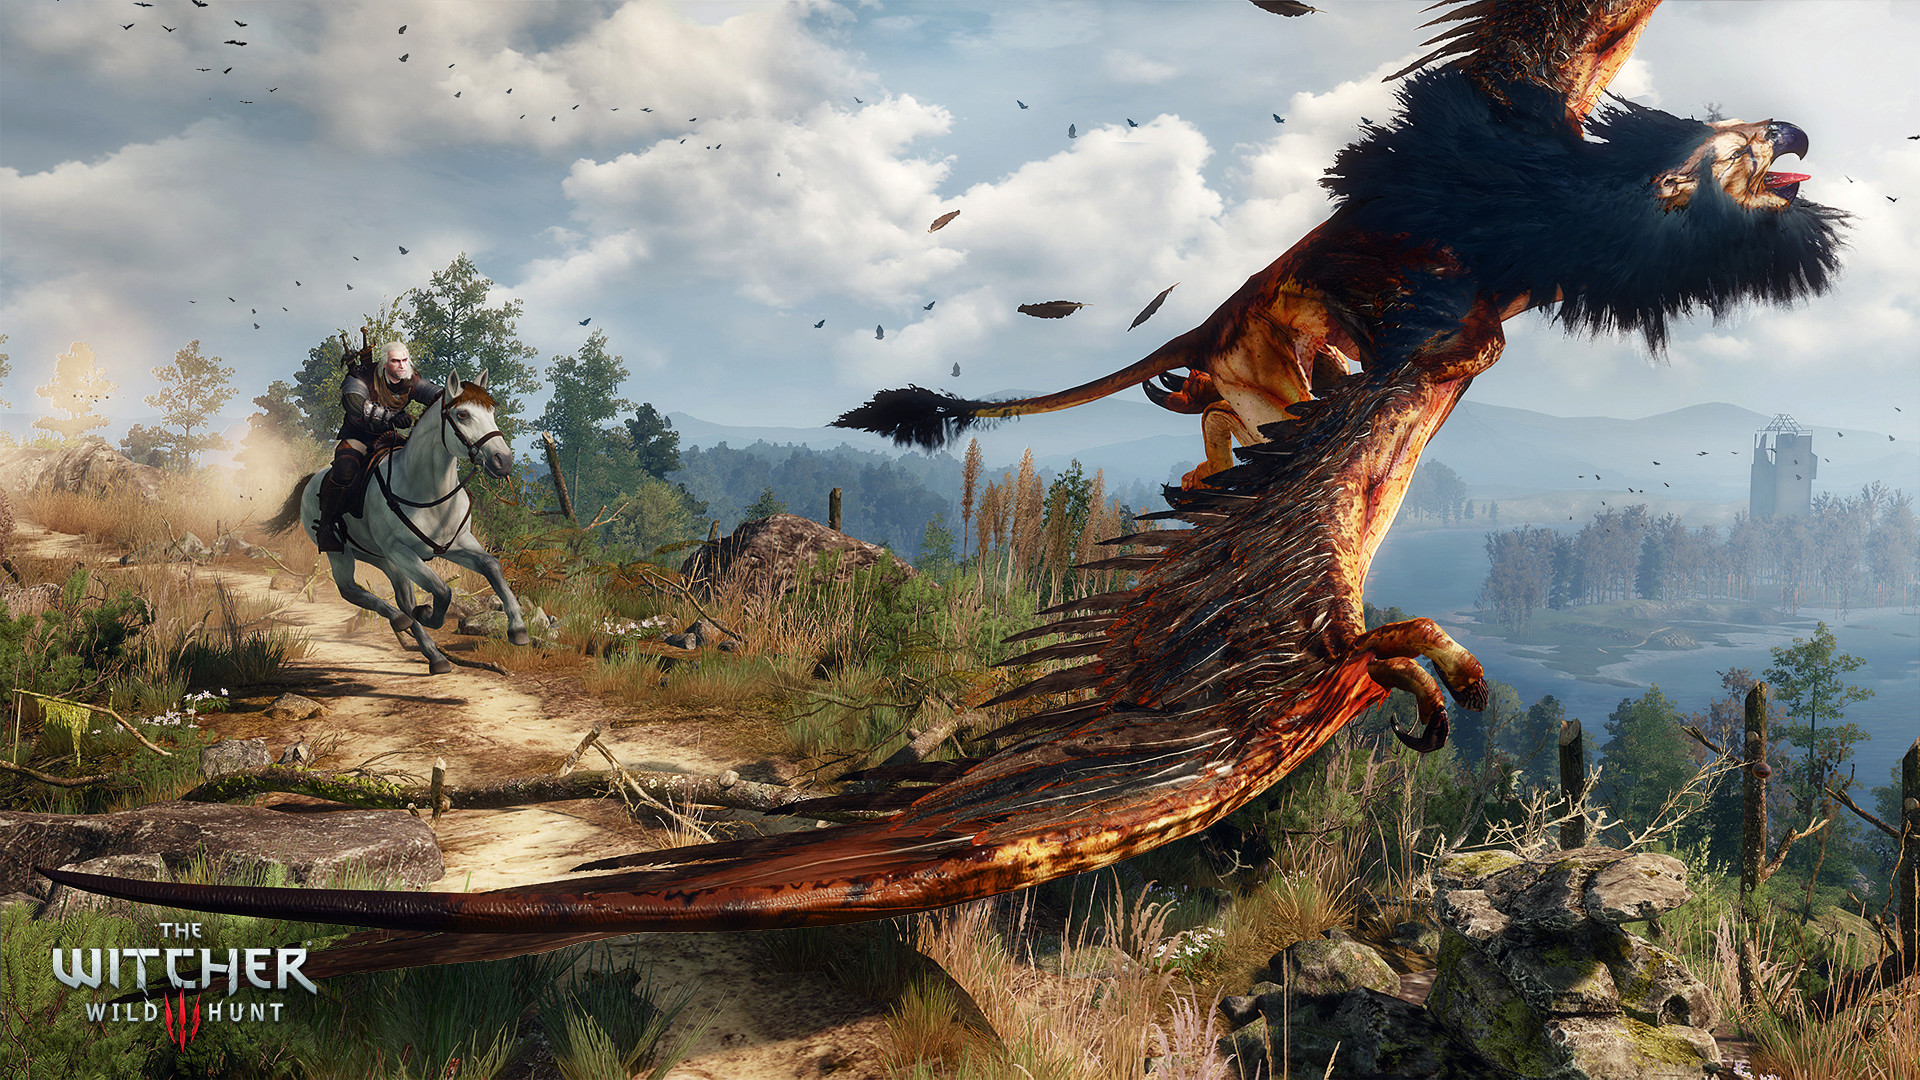 Geralt Fighting A Gryphon In The Witcher 3 (via: CDPR).